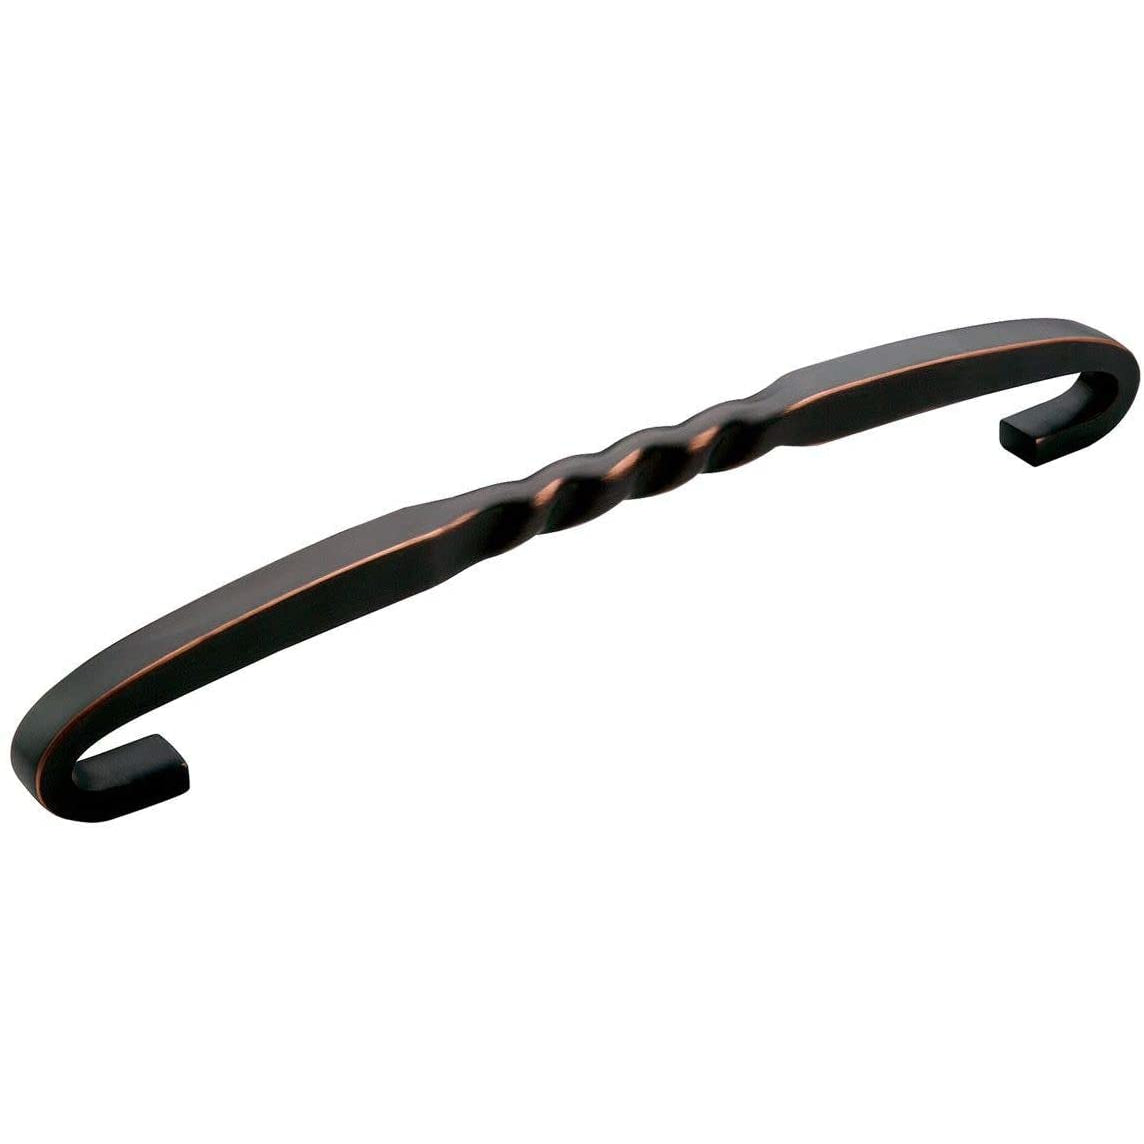 Amerock Inspirations Oil Rubbed Bronze 12" Ctr. Cabinet Handle BP1787-ORB